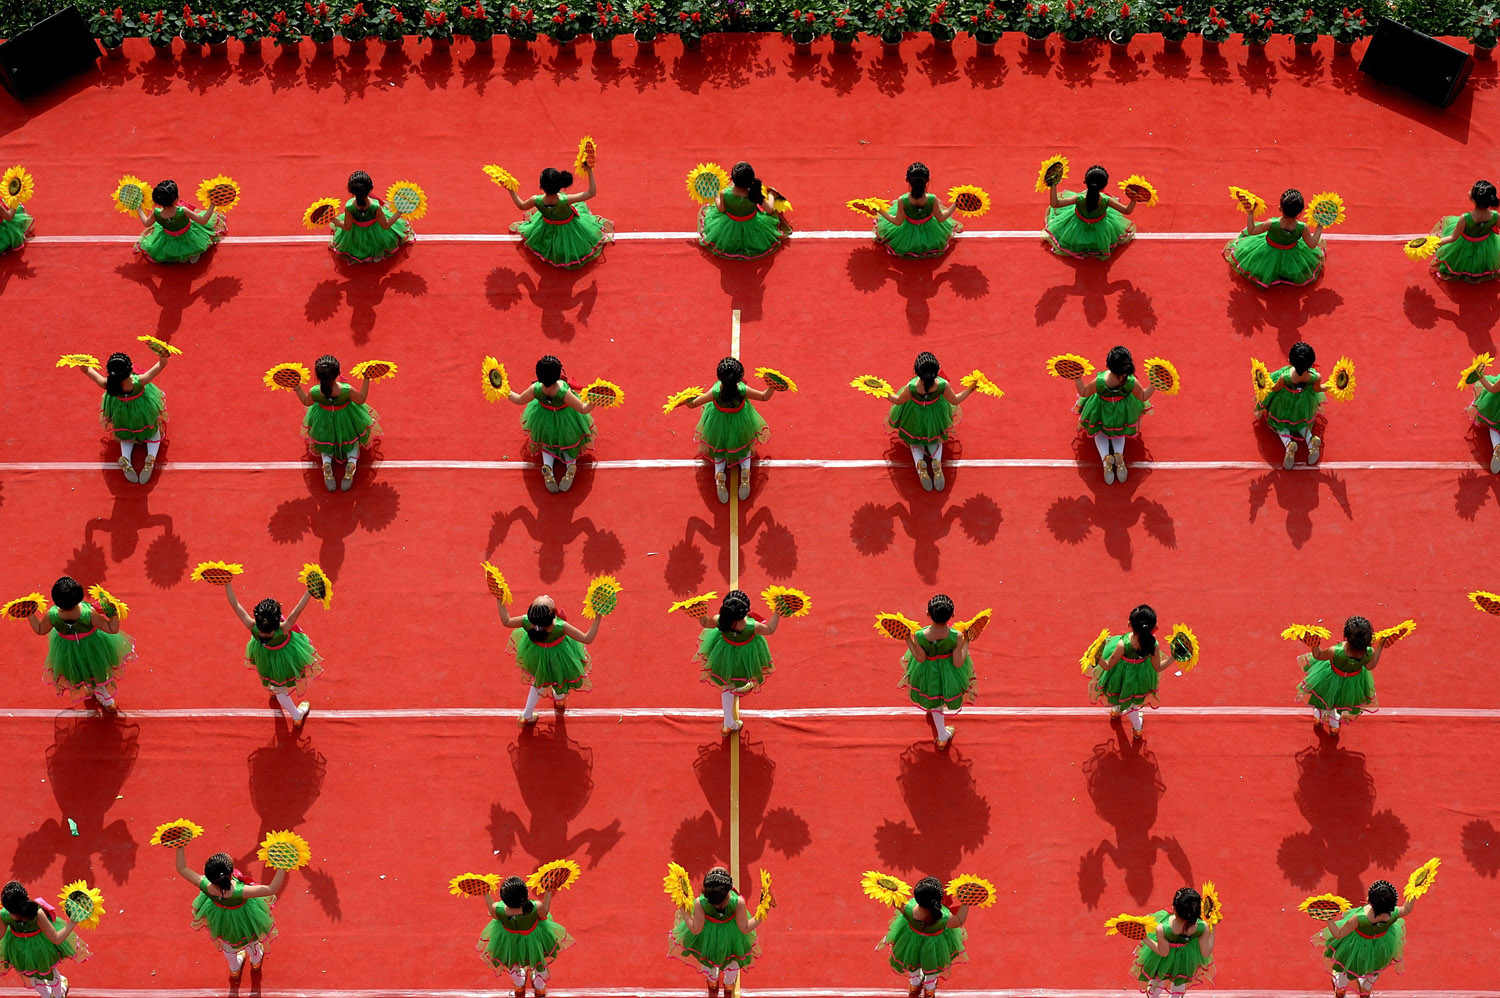 Pupils dance to celebrate the upcoming Children's Day in Xuan'en County, central China's Hubei Province, May 28, 2014.